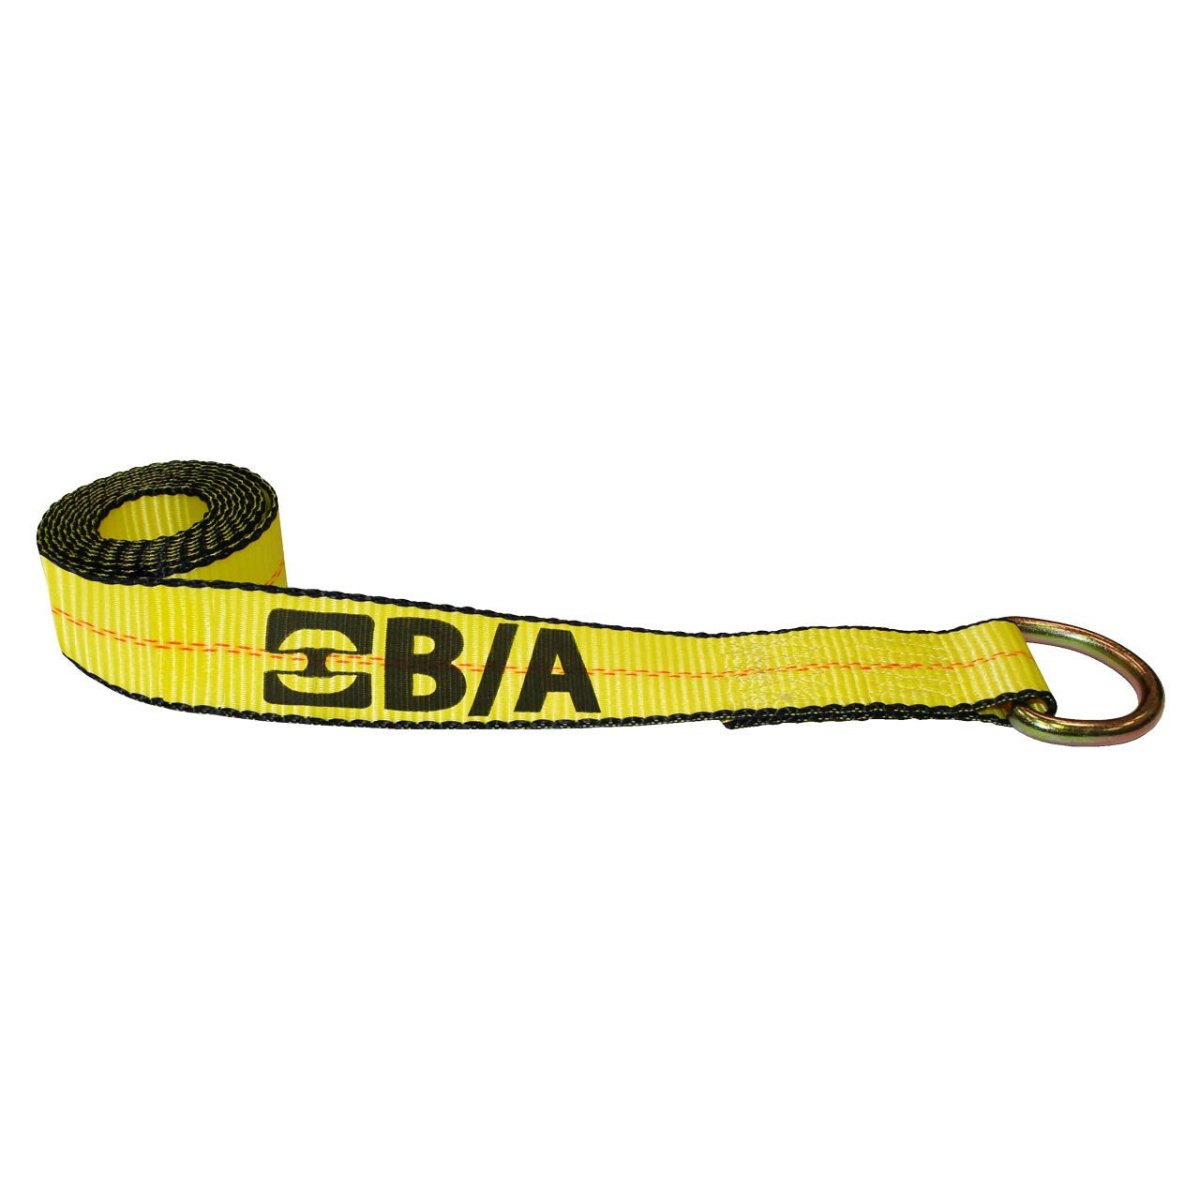 B/A Products Co. 2" D-Ring Wheel Lift Strap - starequipmentsales